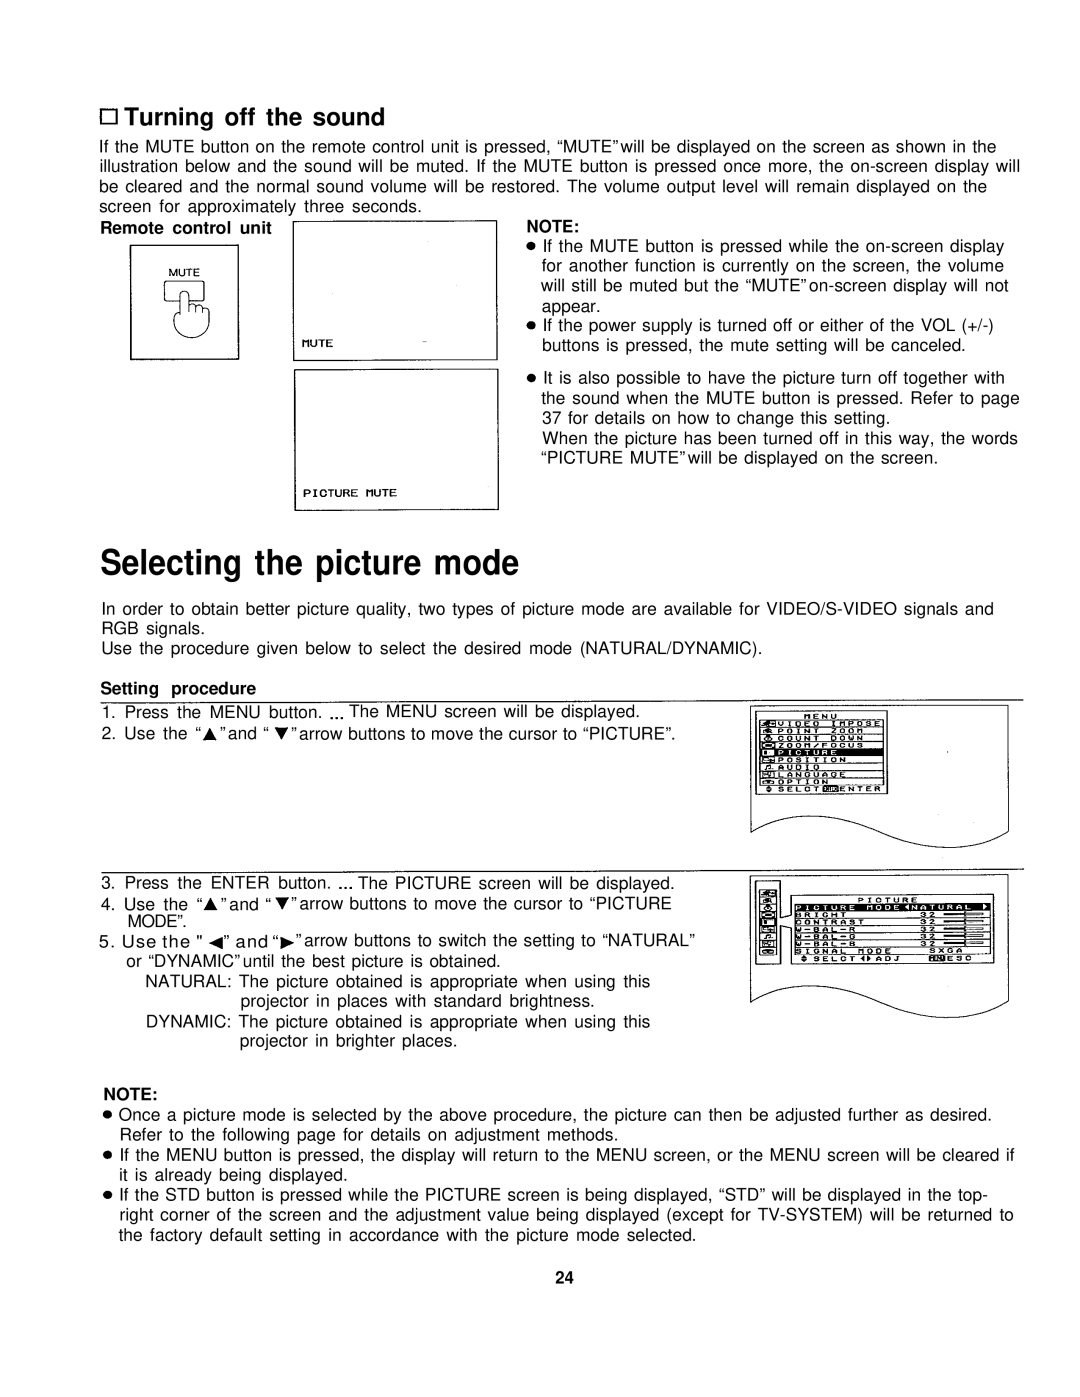 Panasonic PT-L795U manual Turning off the sound, Selecting the picture mode 